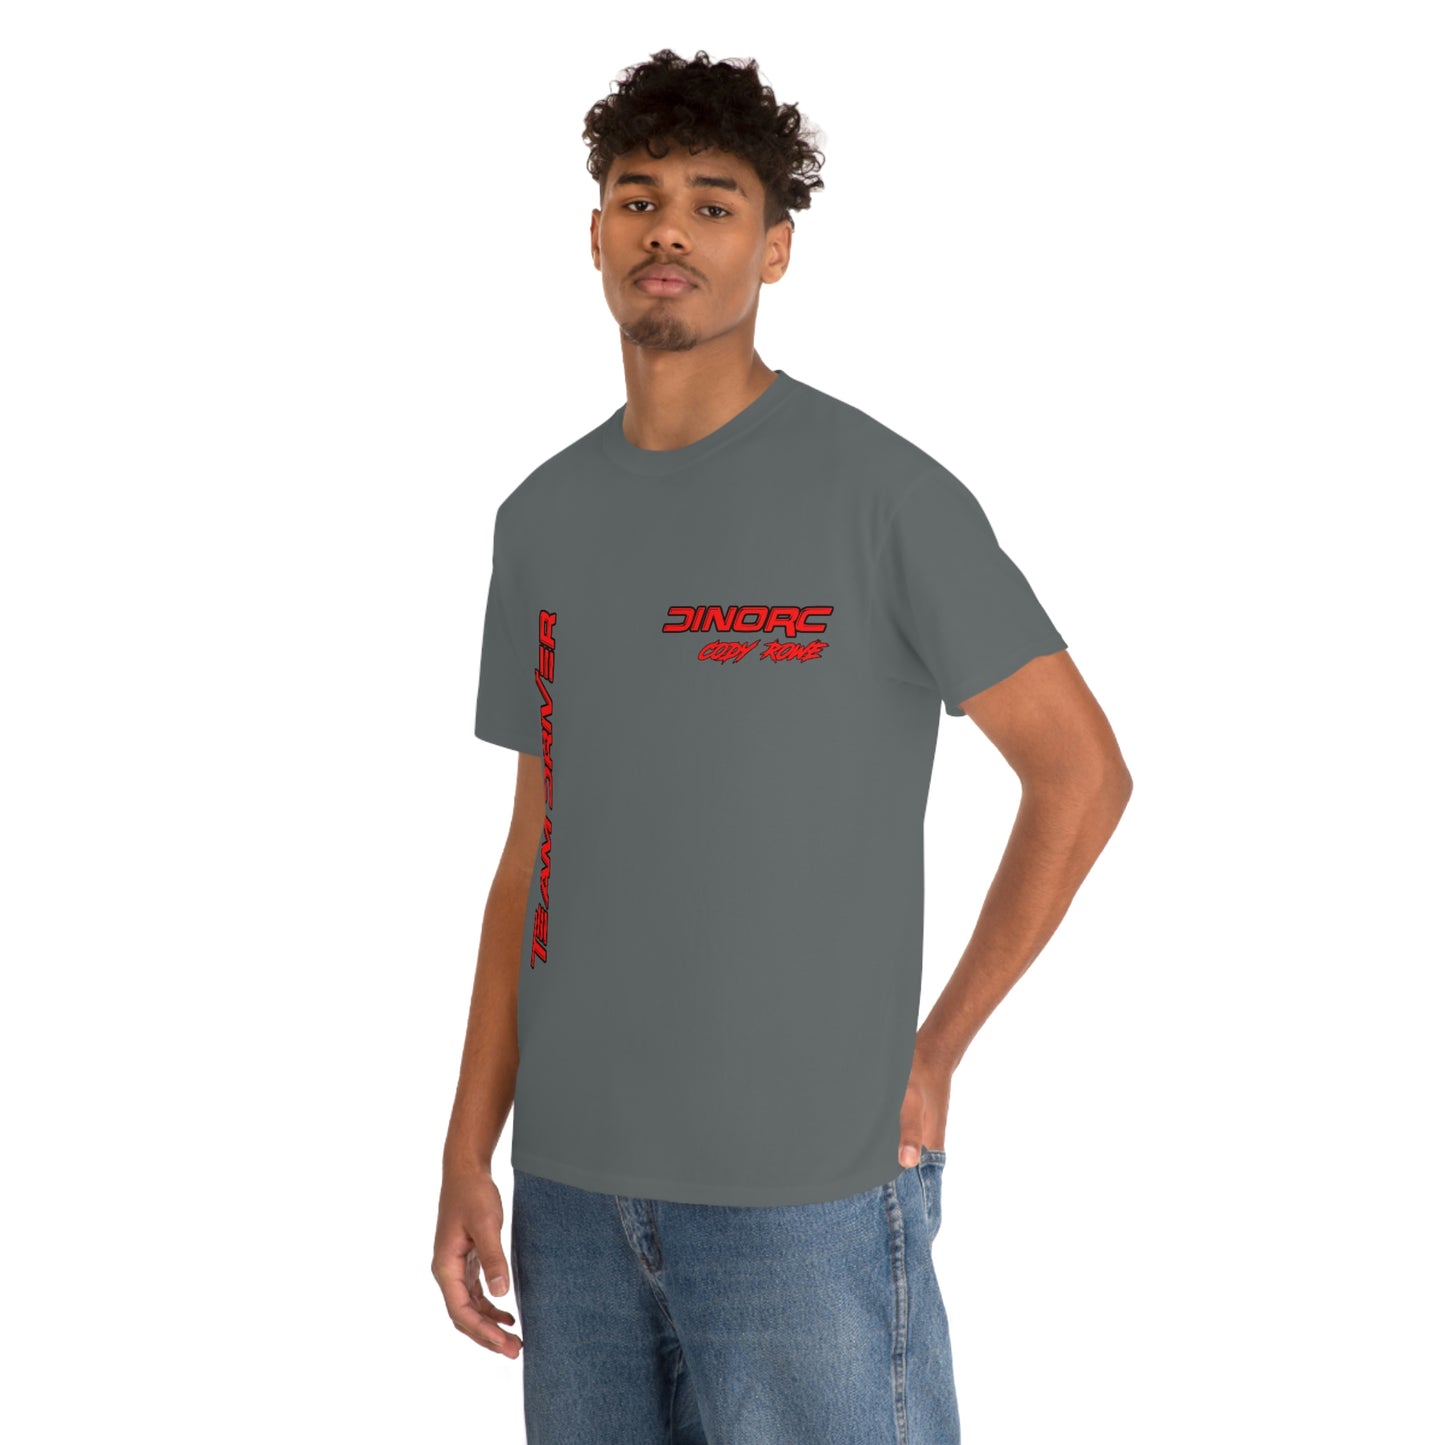 Team Driver Cody Rowe Front and Back DinoRc Logo T-Shirt S-5x 5 colors